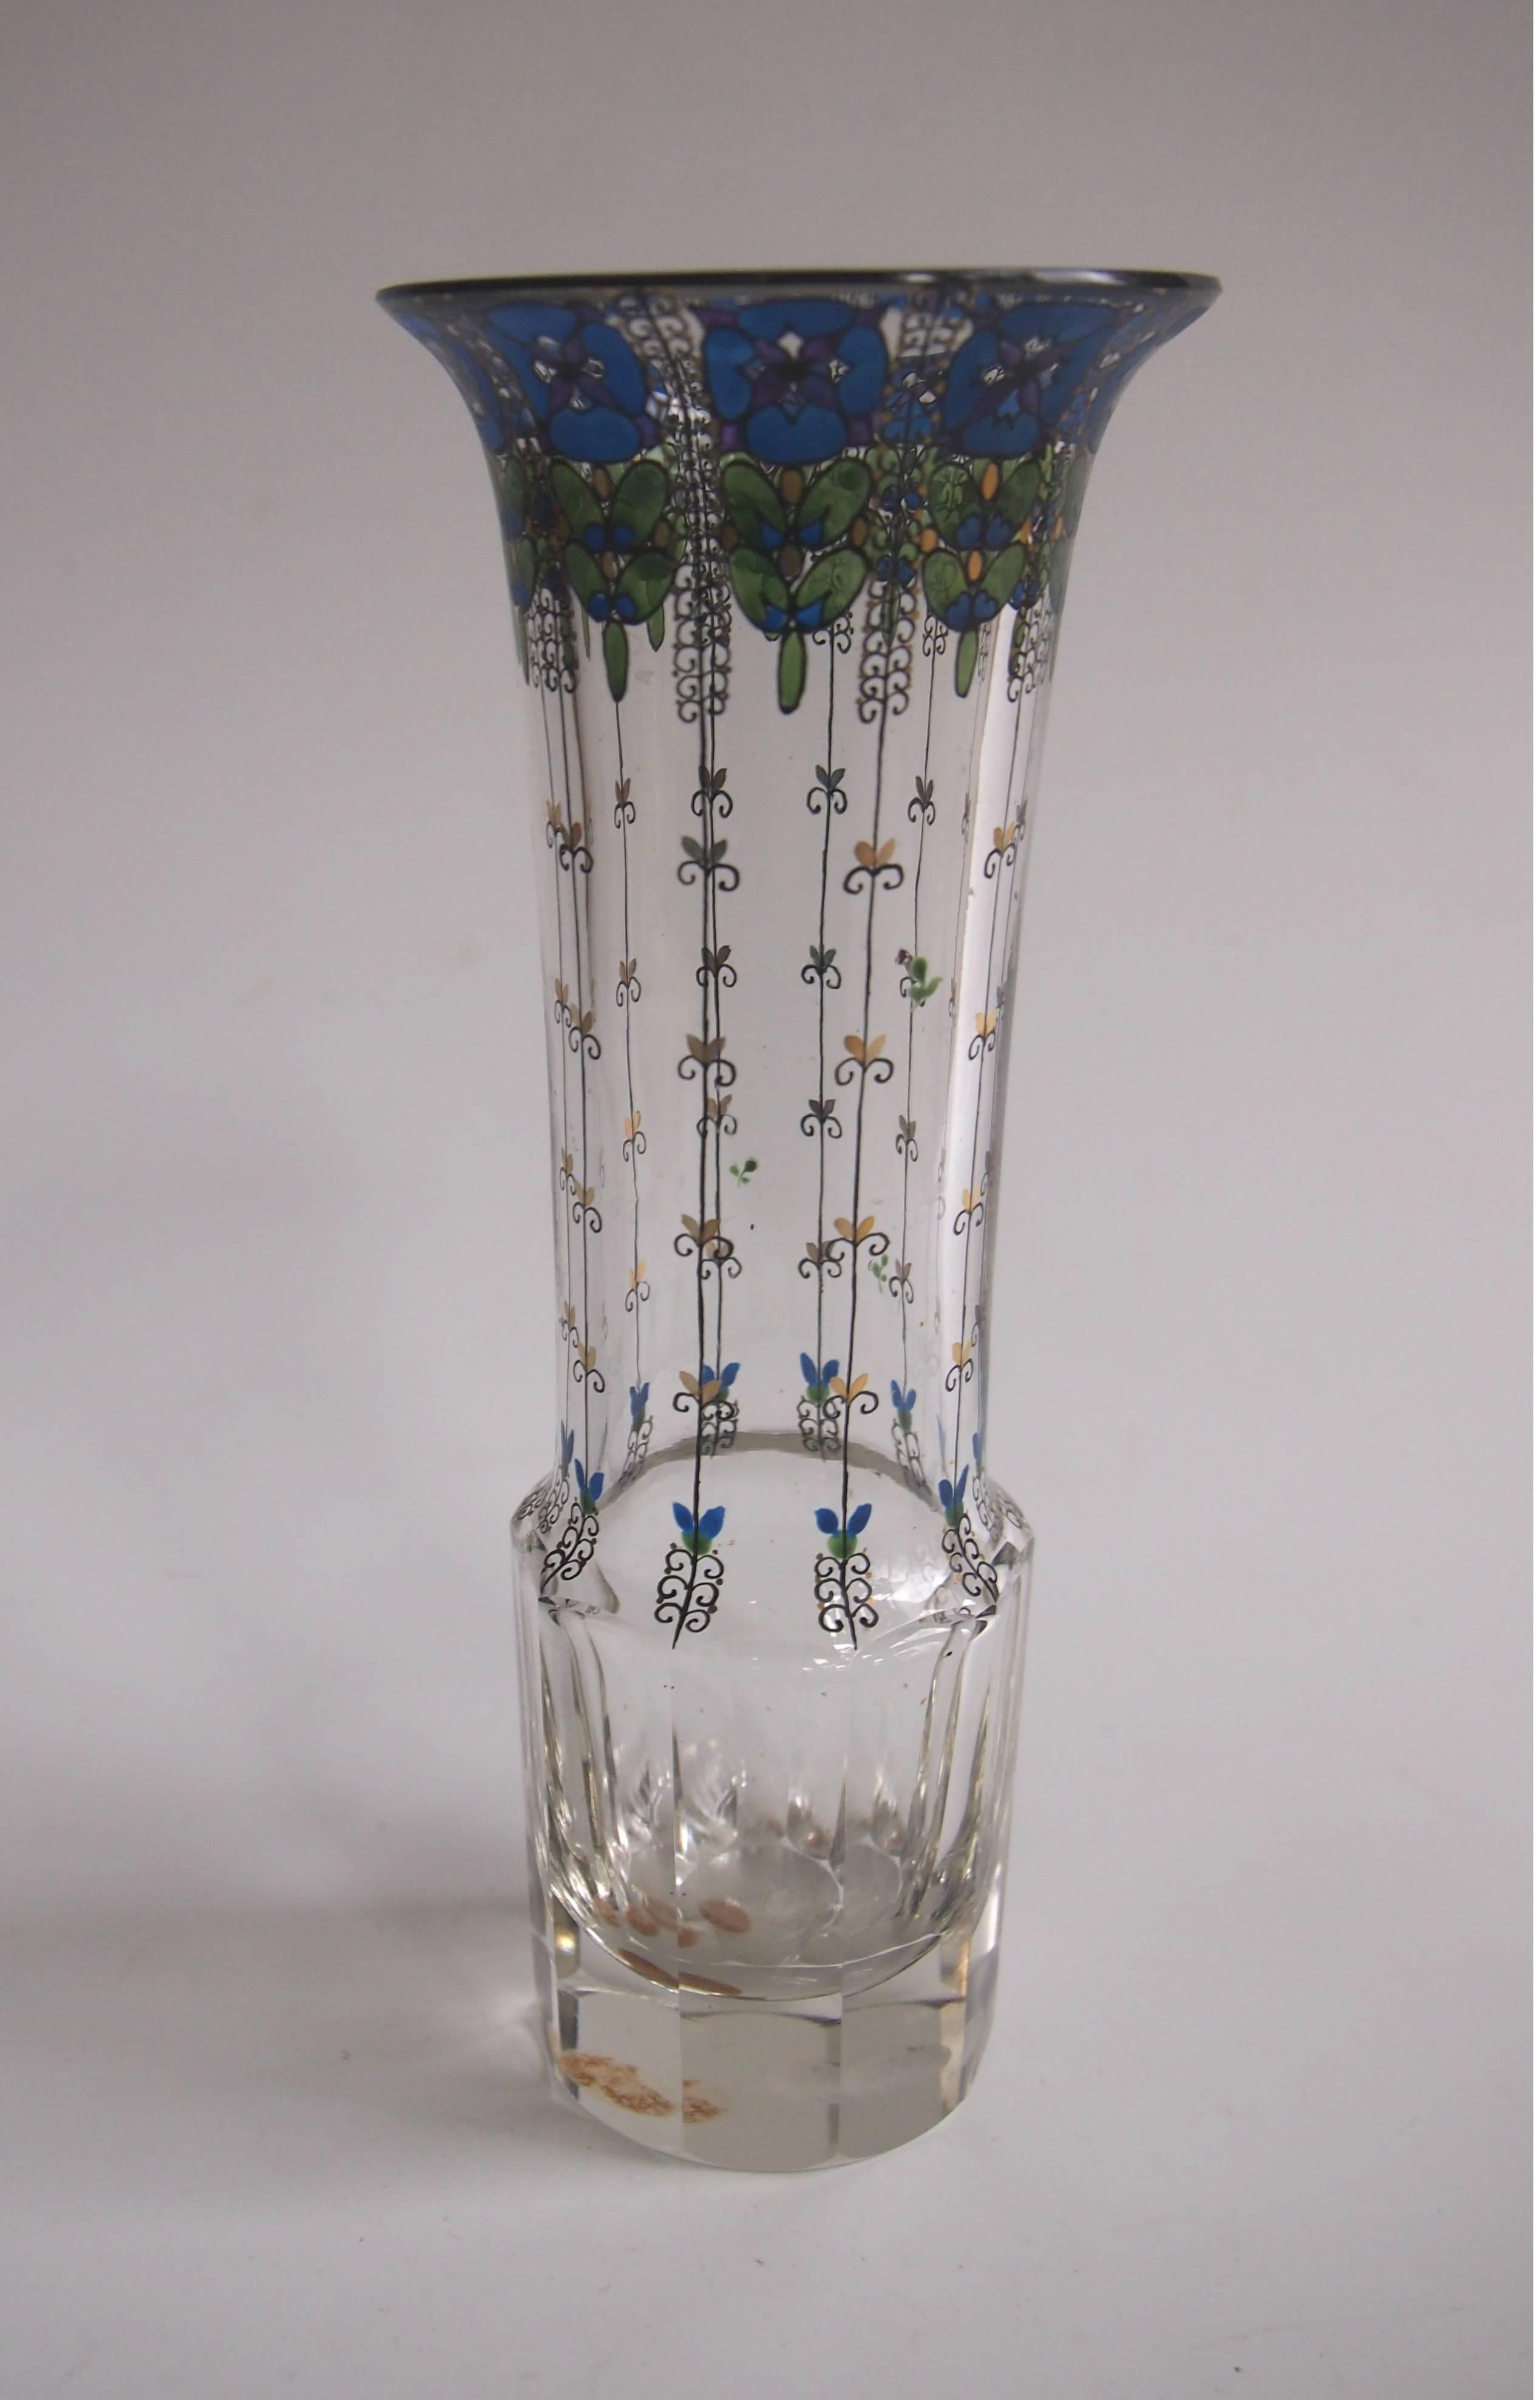 Cute gilded and enamel Haida flared top vase with black green and blue decoration draping down the vase and the original factory label to the base (see image 7)

Haida, now known as Novy Bor, was one of the greatest bohemian glass schools of all